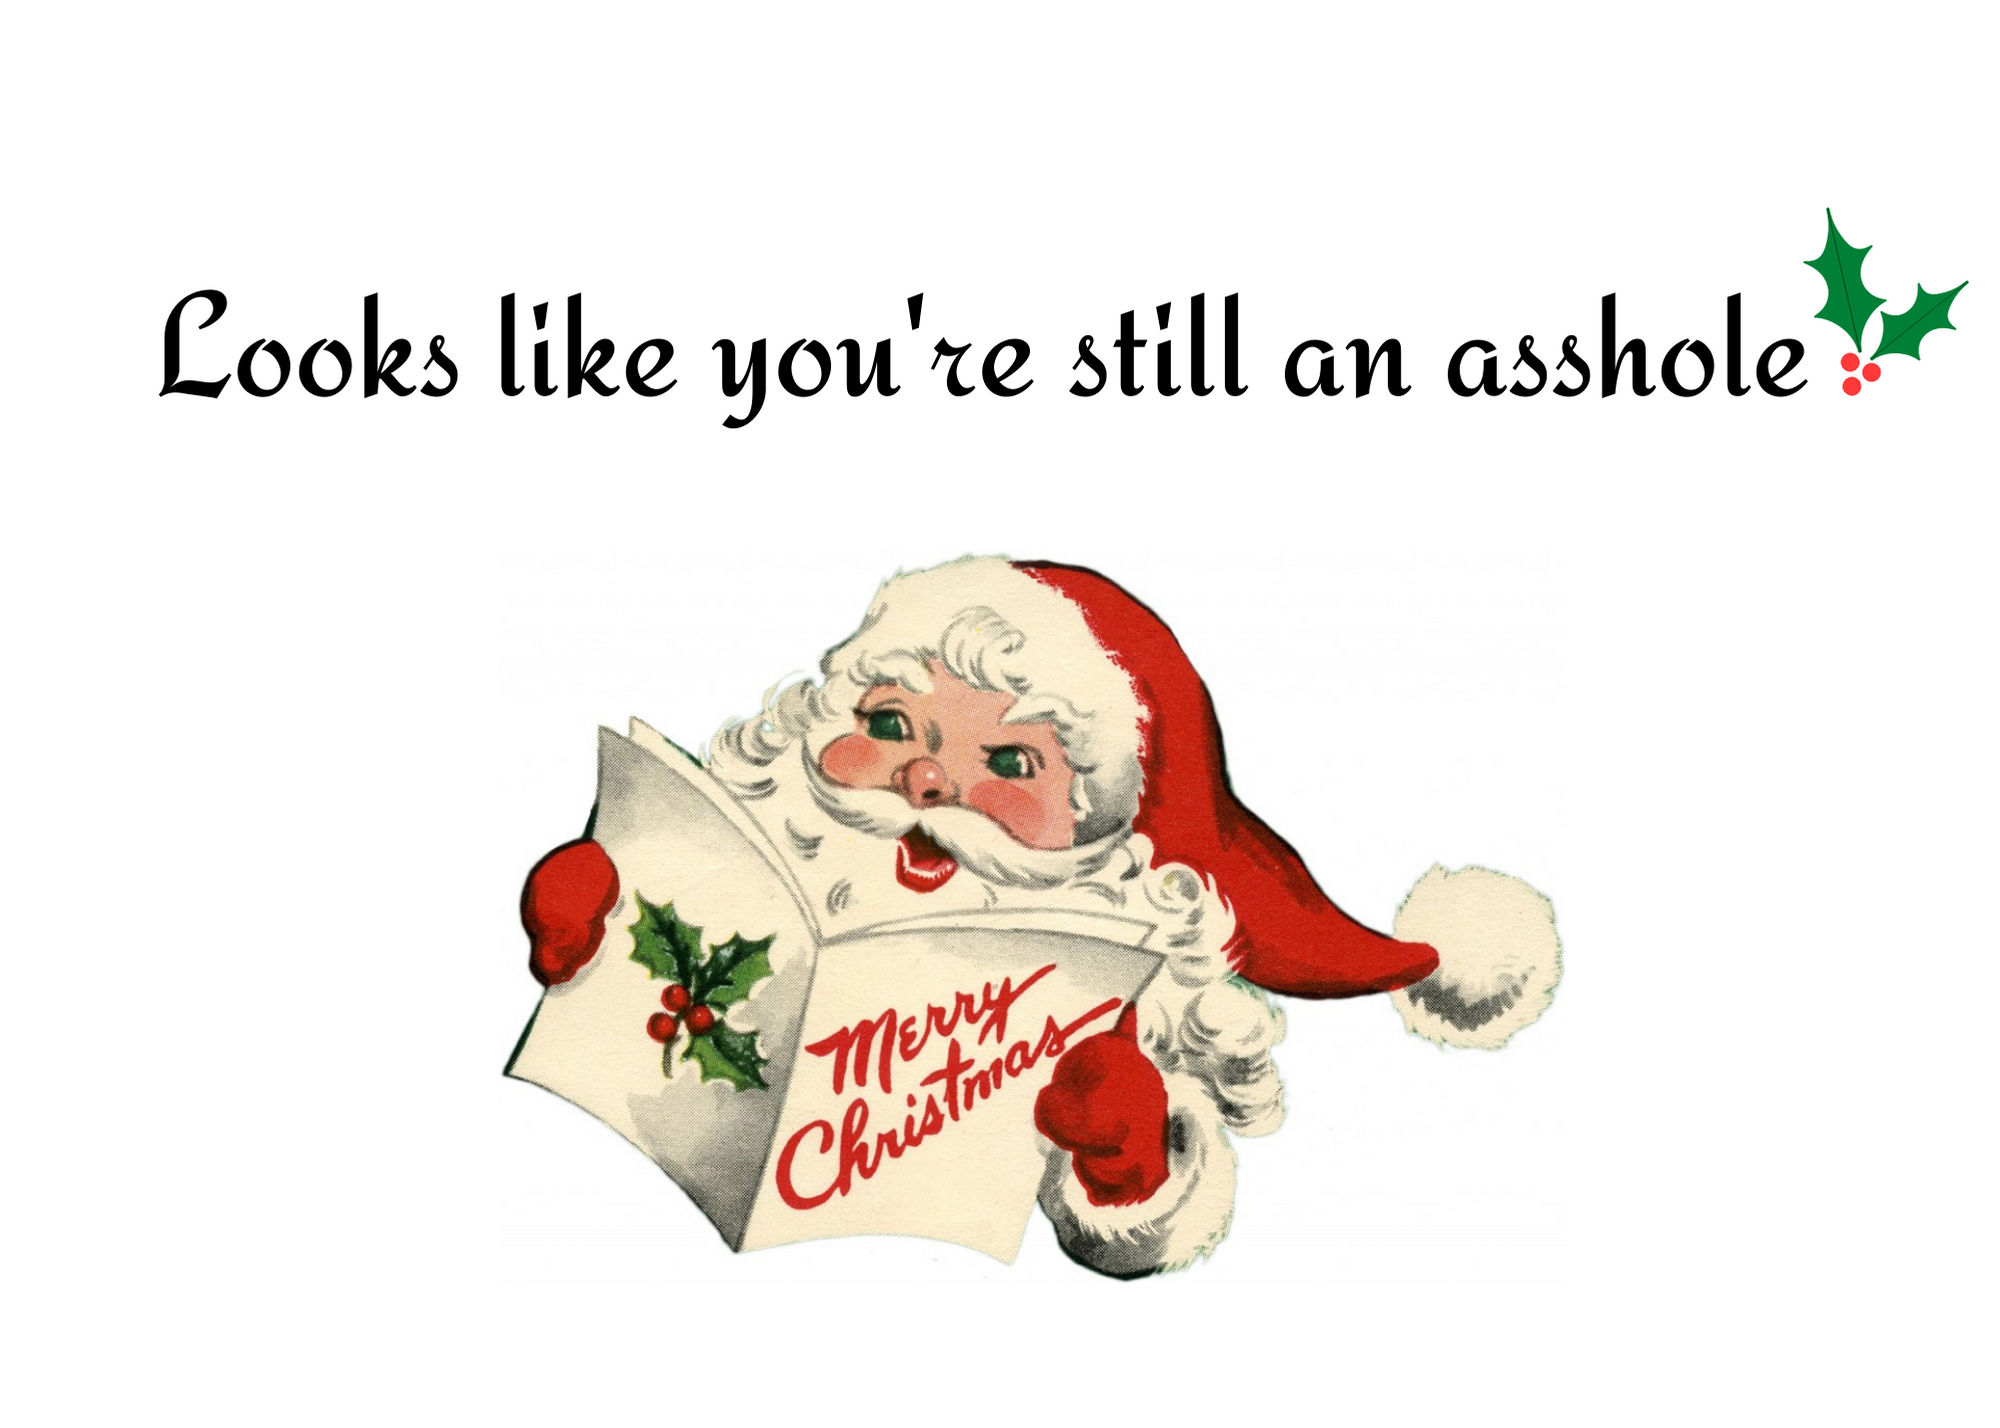 White seed paper greeting card says "Looks like you're still an asshole" with vintage Santa